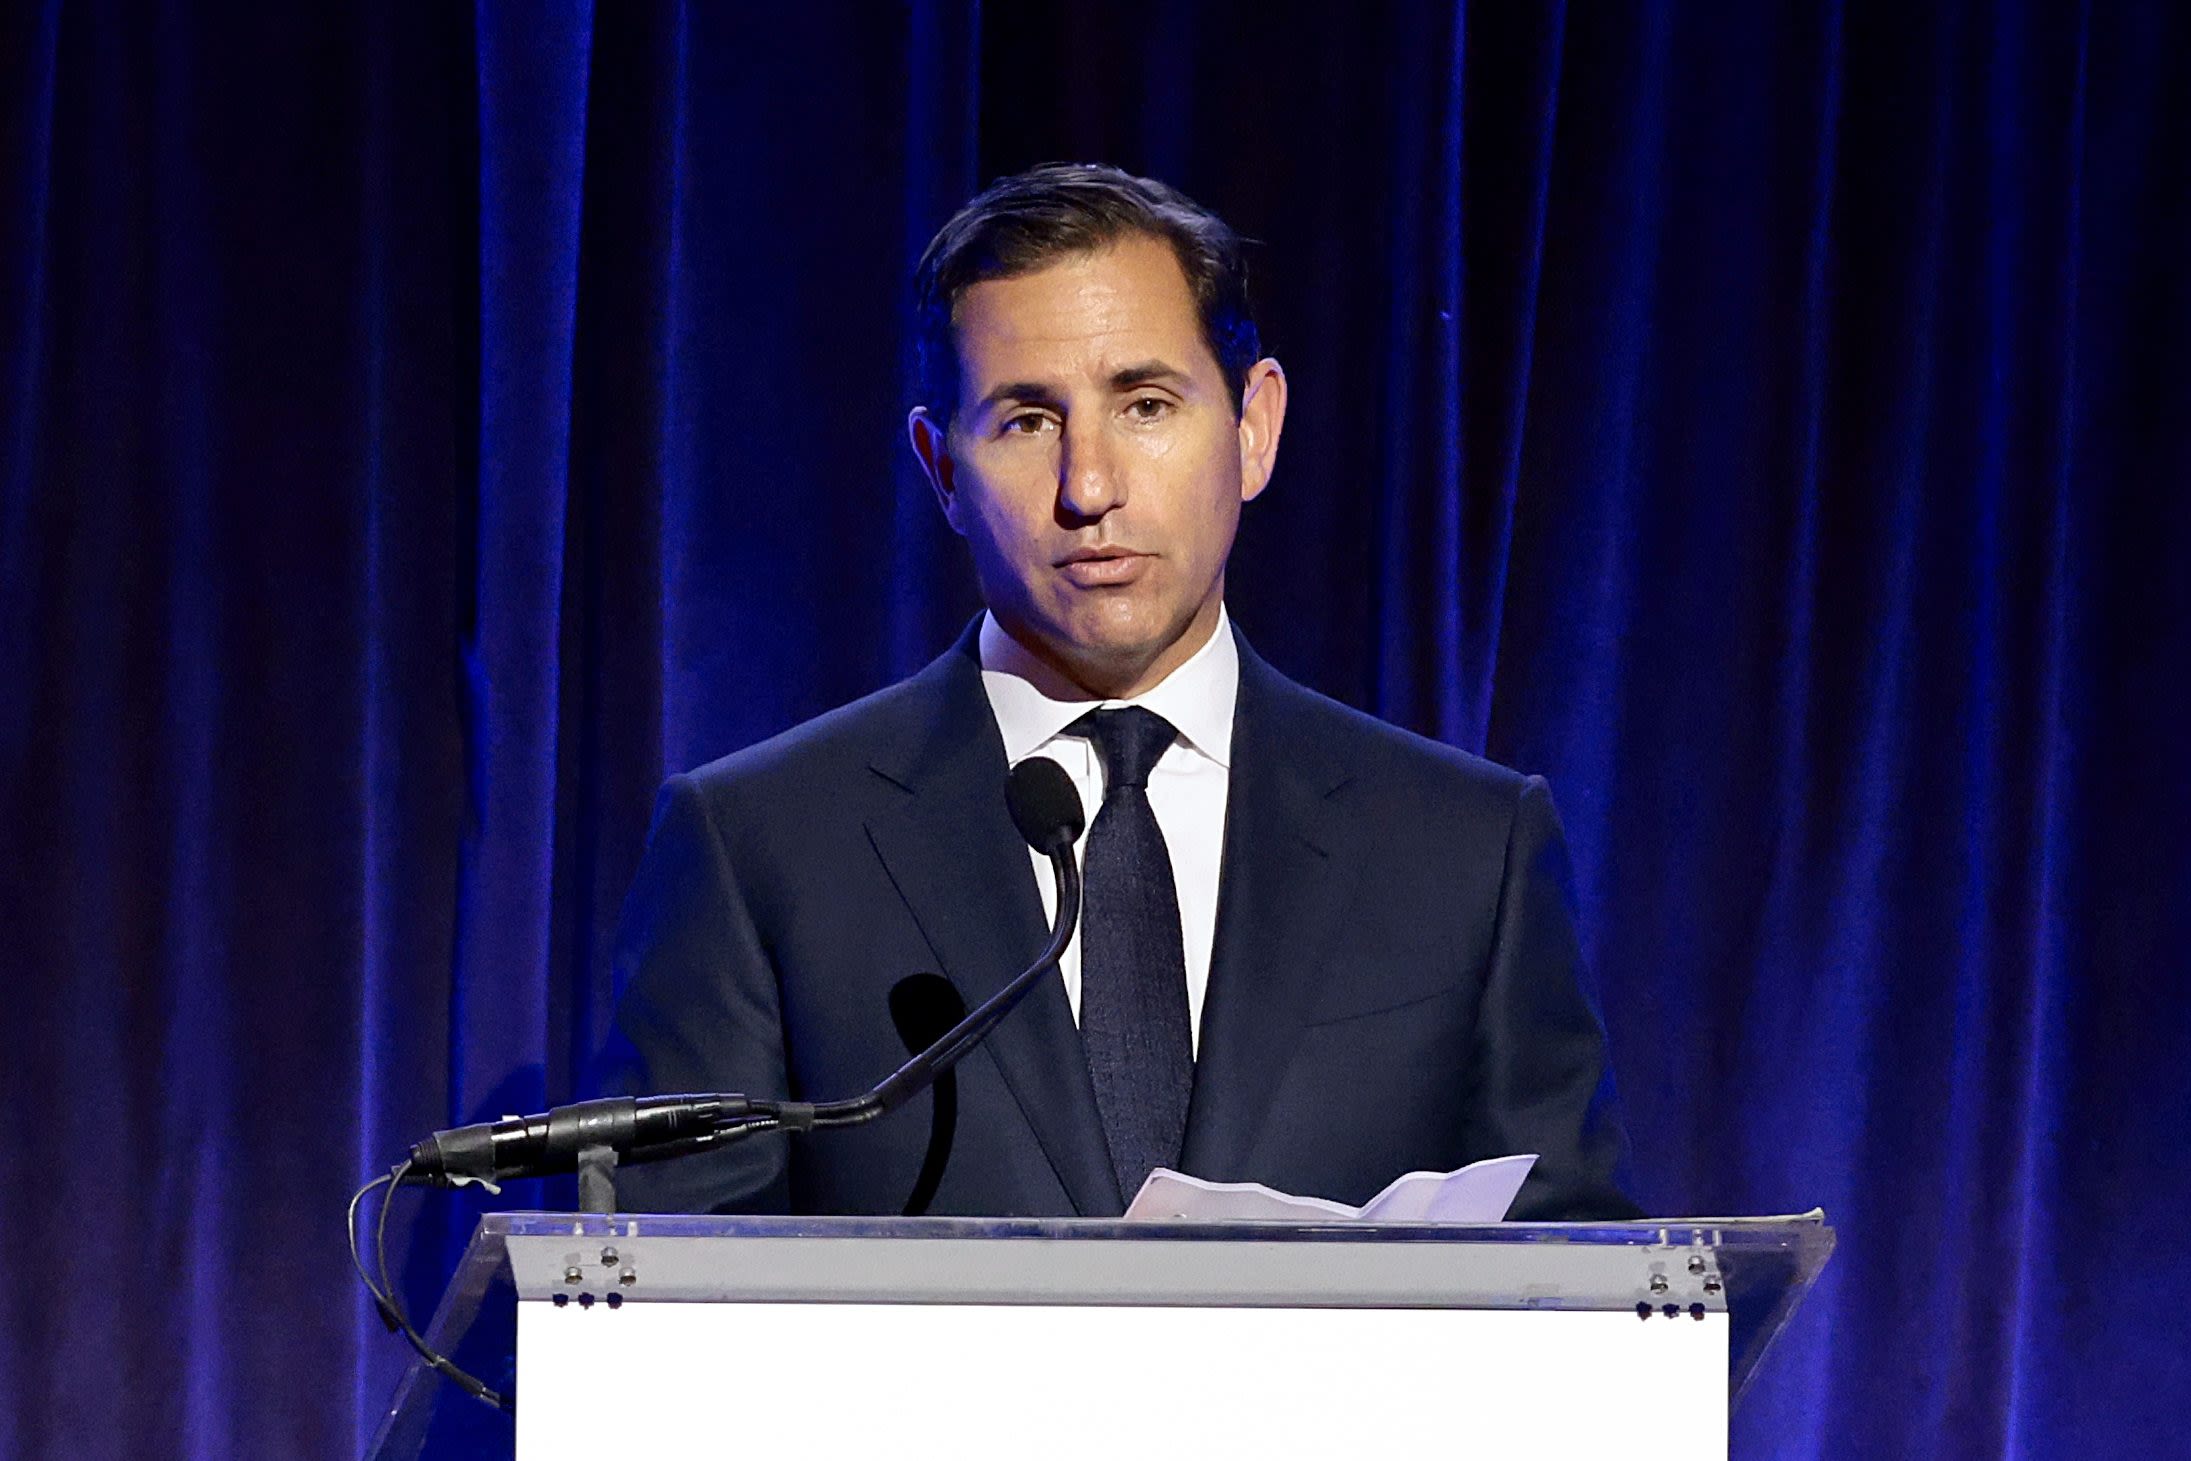 Brian Weinstein Named Co-CEO of 3 Arts Entertainment and Senior Advisor to the Office of the CEO at Lionsgate